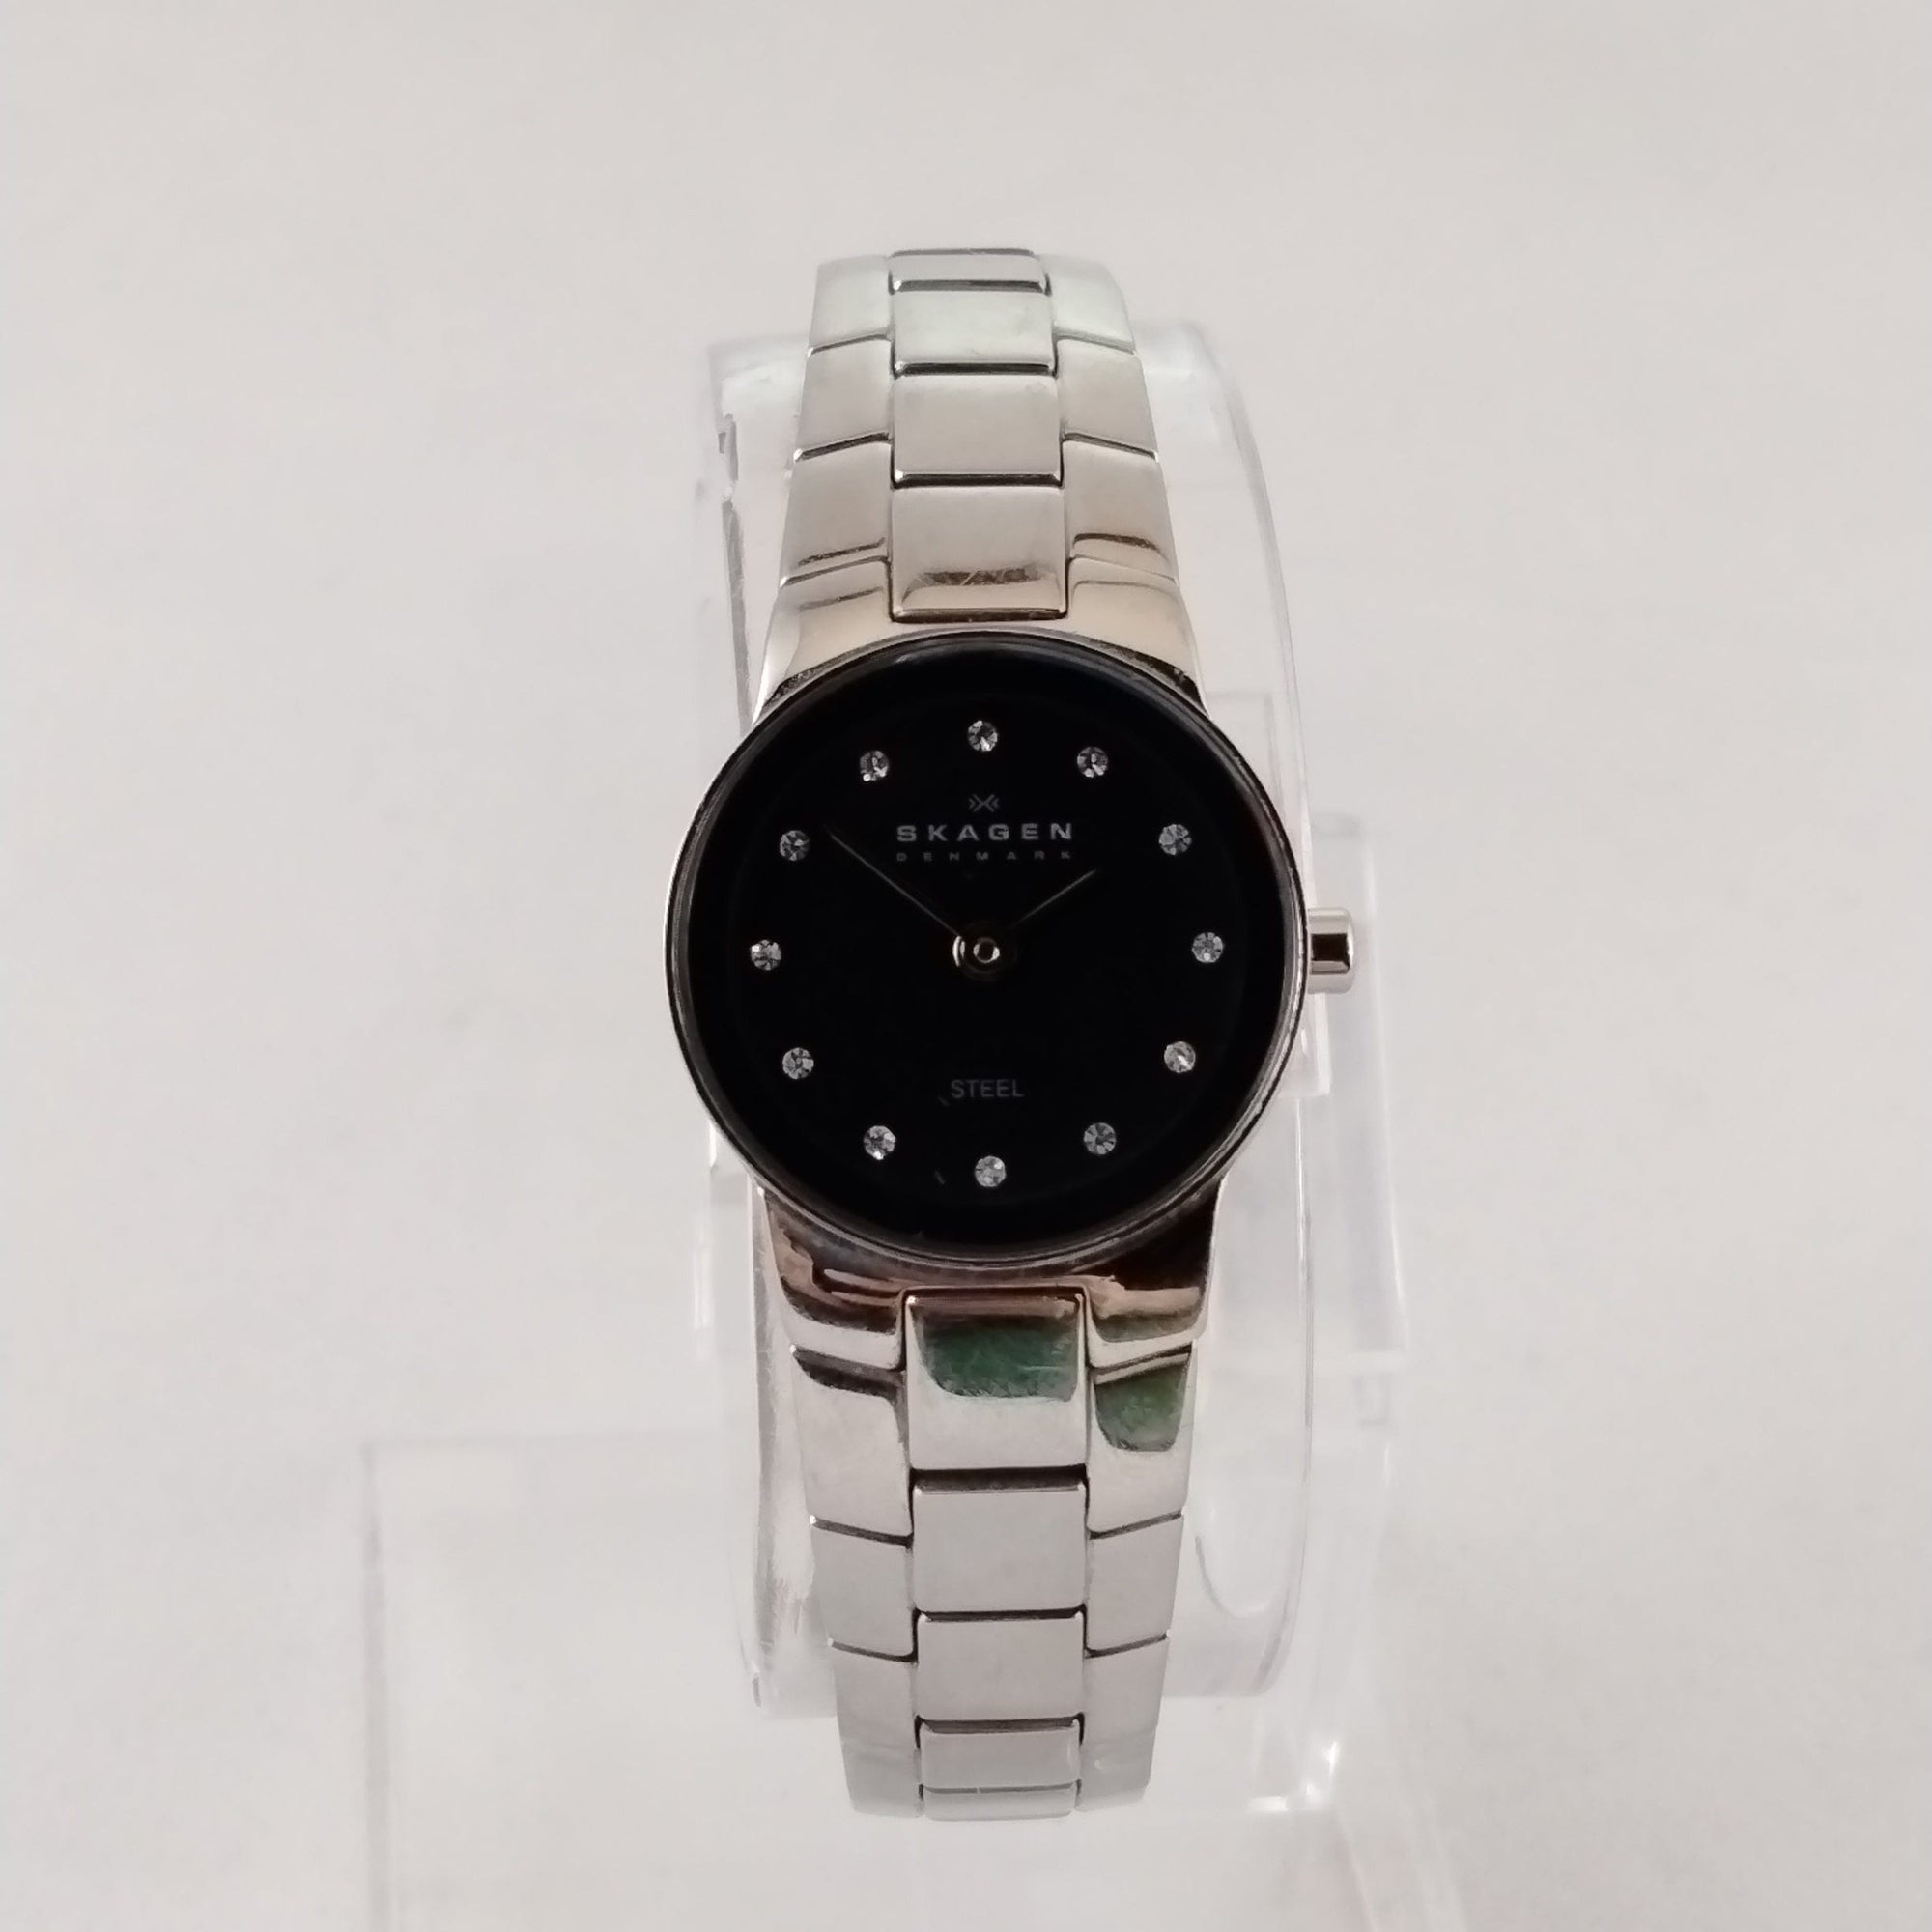 I Like Mikes Mid Century Modern Watches Skagen Women's Stainless Steel Round Watch, Black Dial, Jewel Hour Markers, Link Bracelet